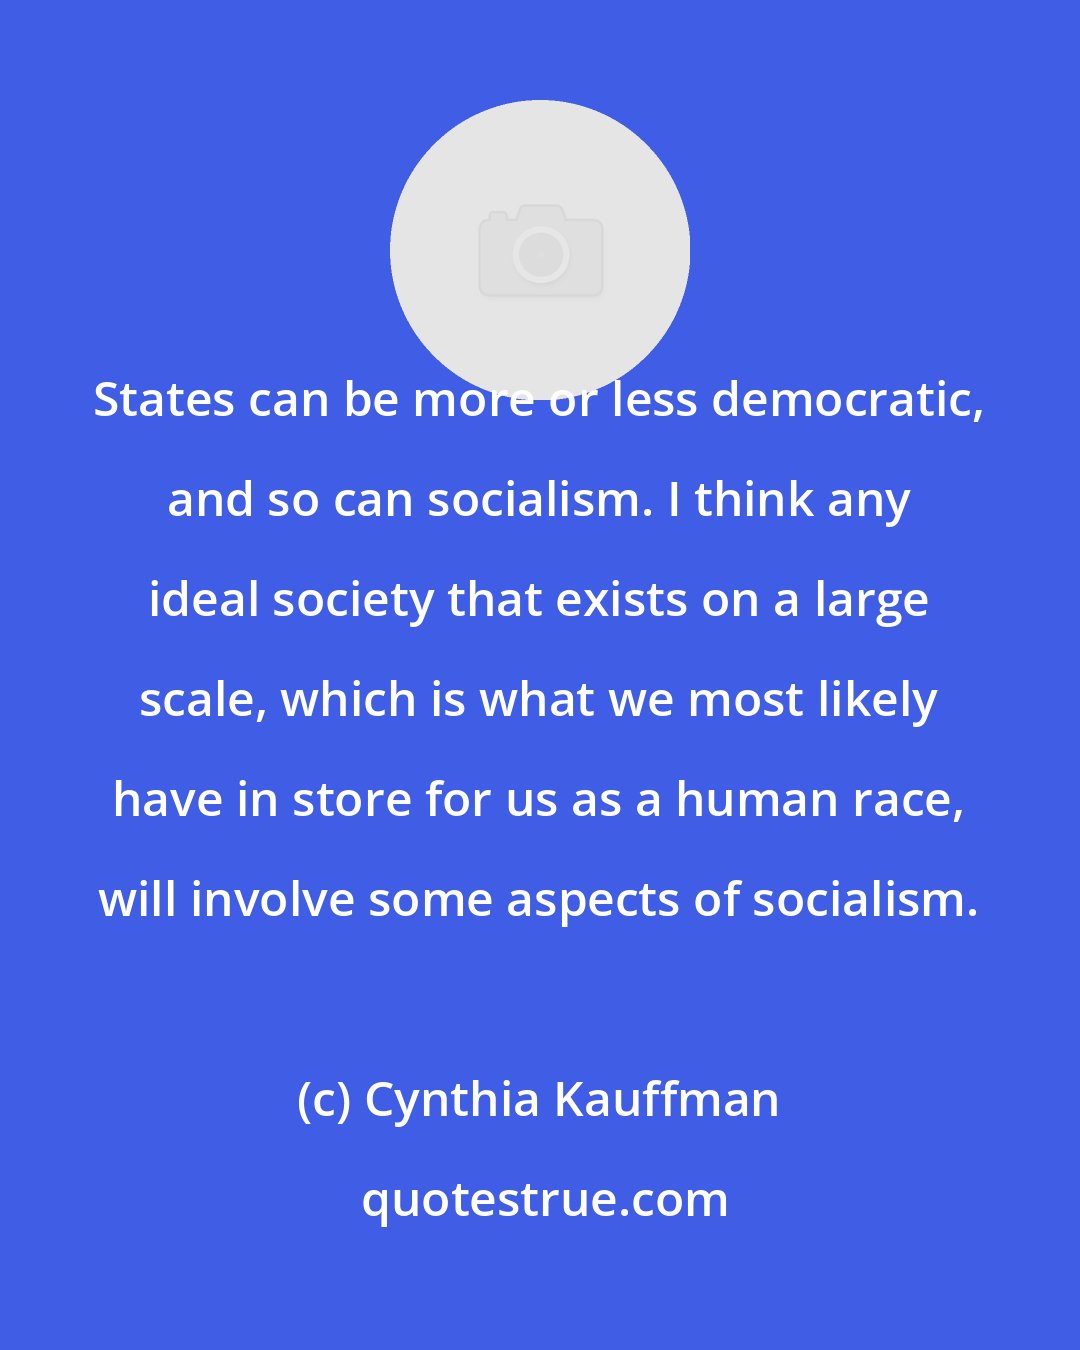 Cynthia Kauffman: States can be more or less democratic, and so can socialism. I think any ideal society that exists on a large scale, which is what we most likely have in store for us as a human race, will involve some aspects of socialism.